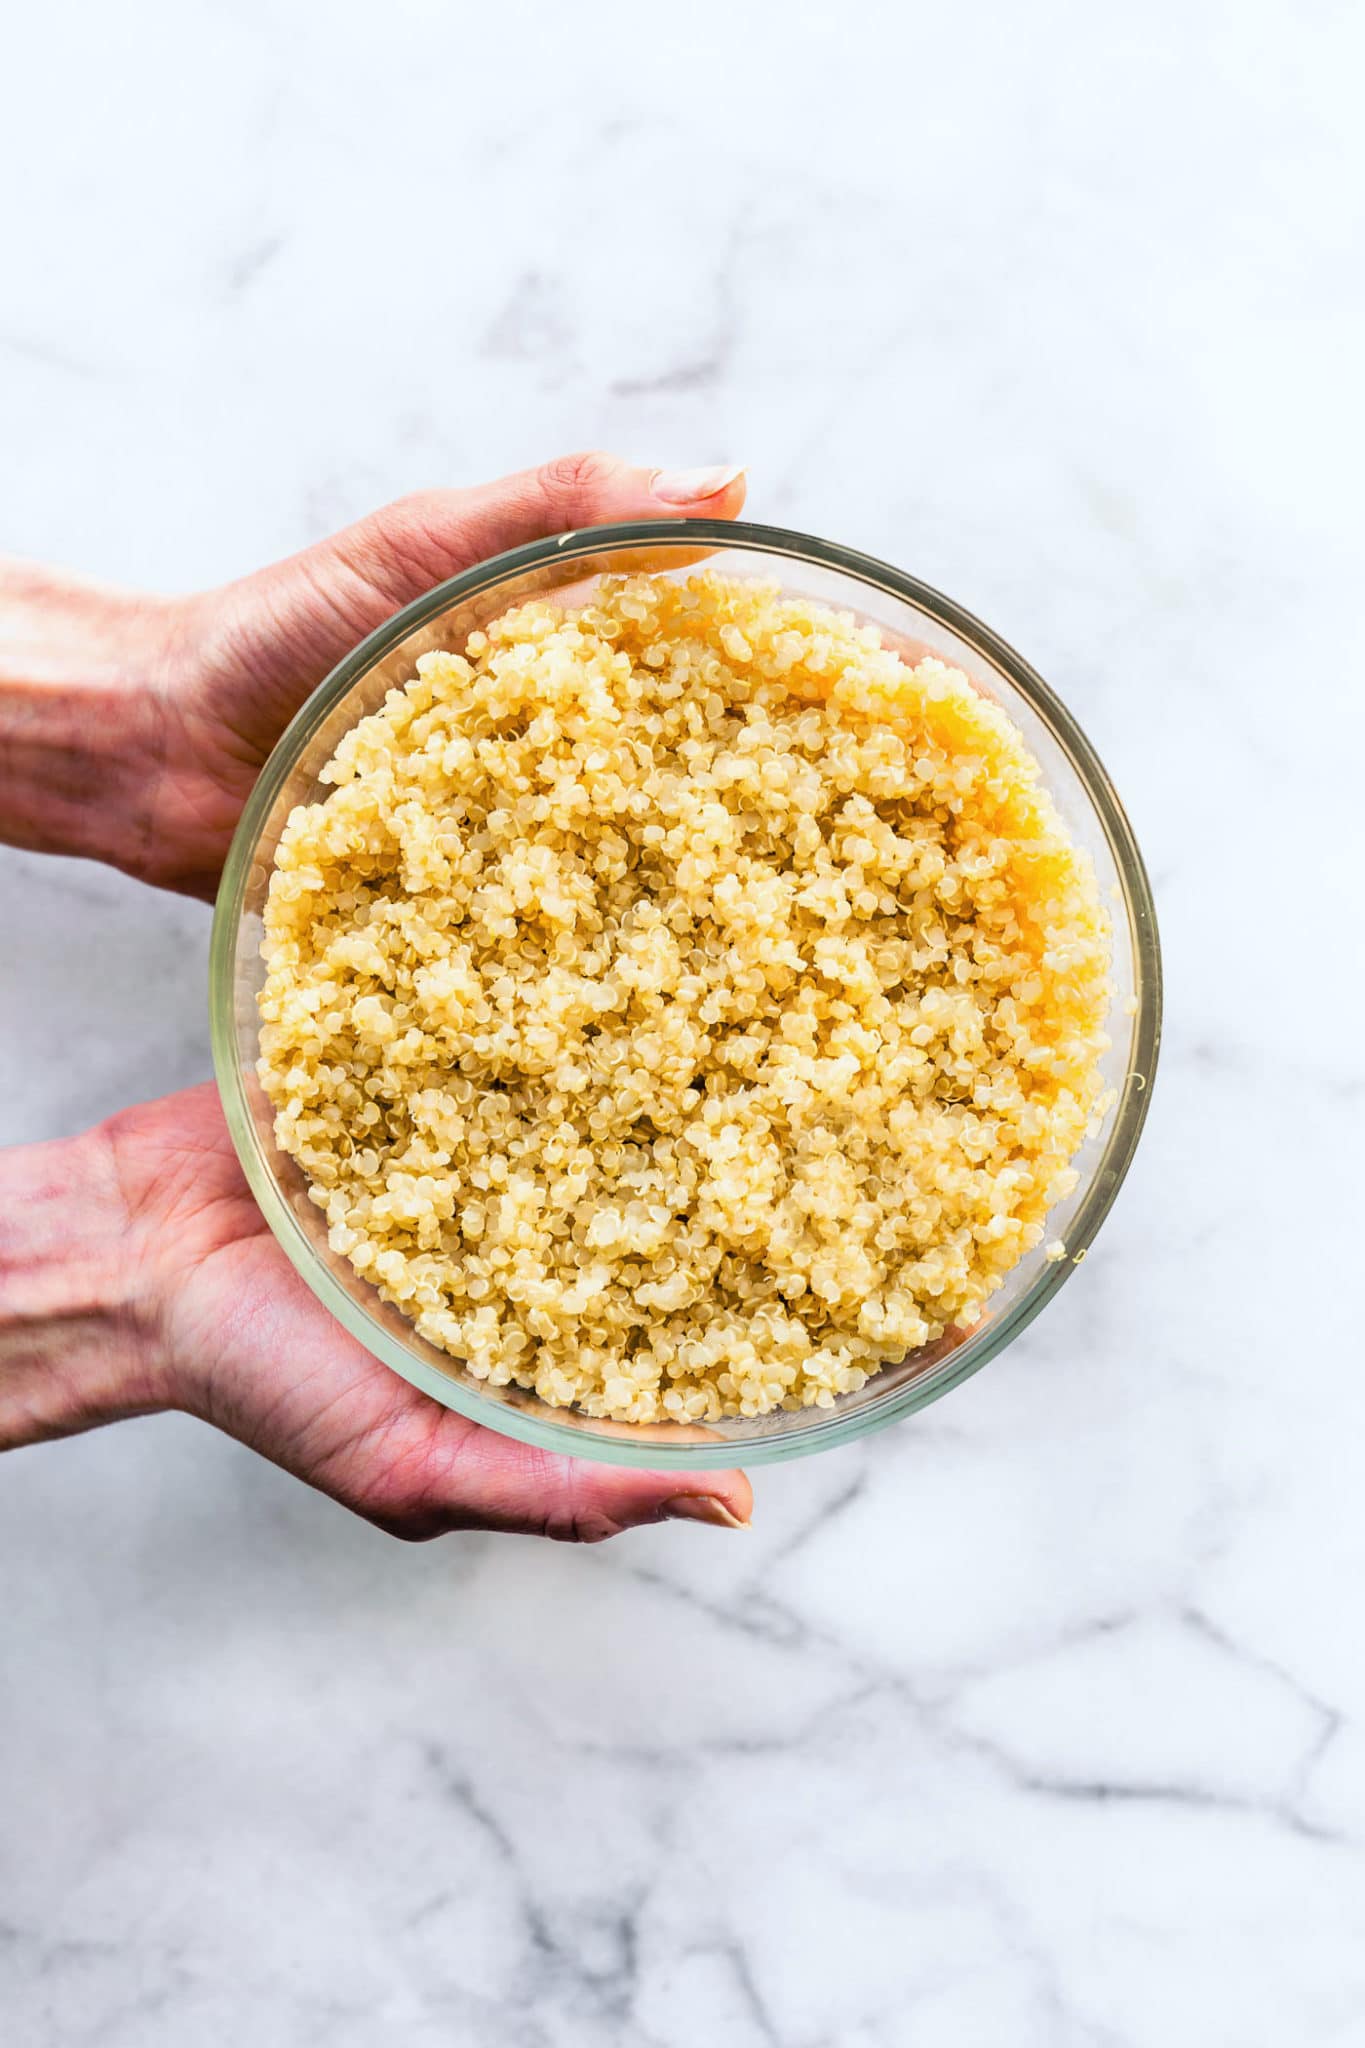 two hands holding a glass bowl full of gluten free quinoa grains